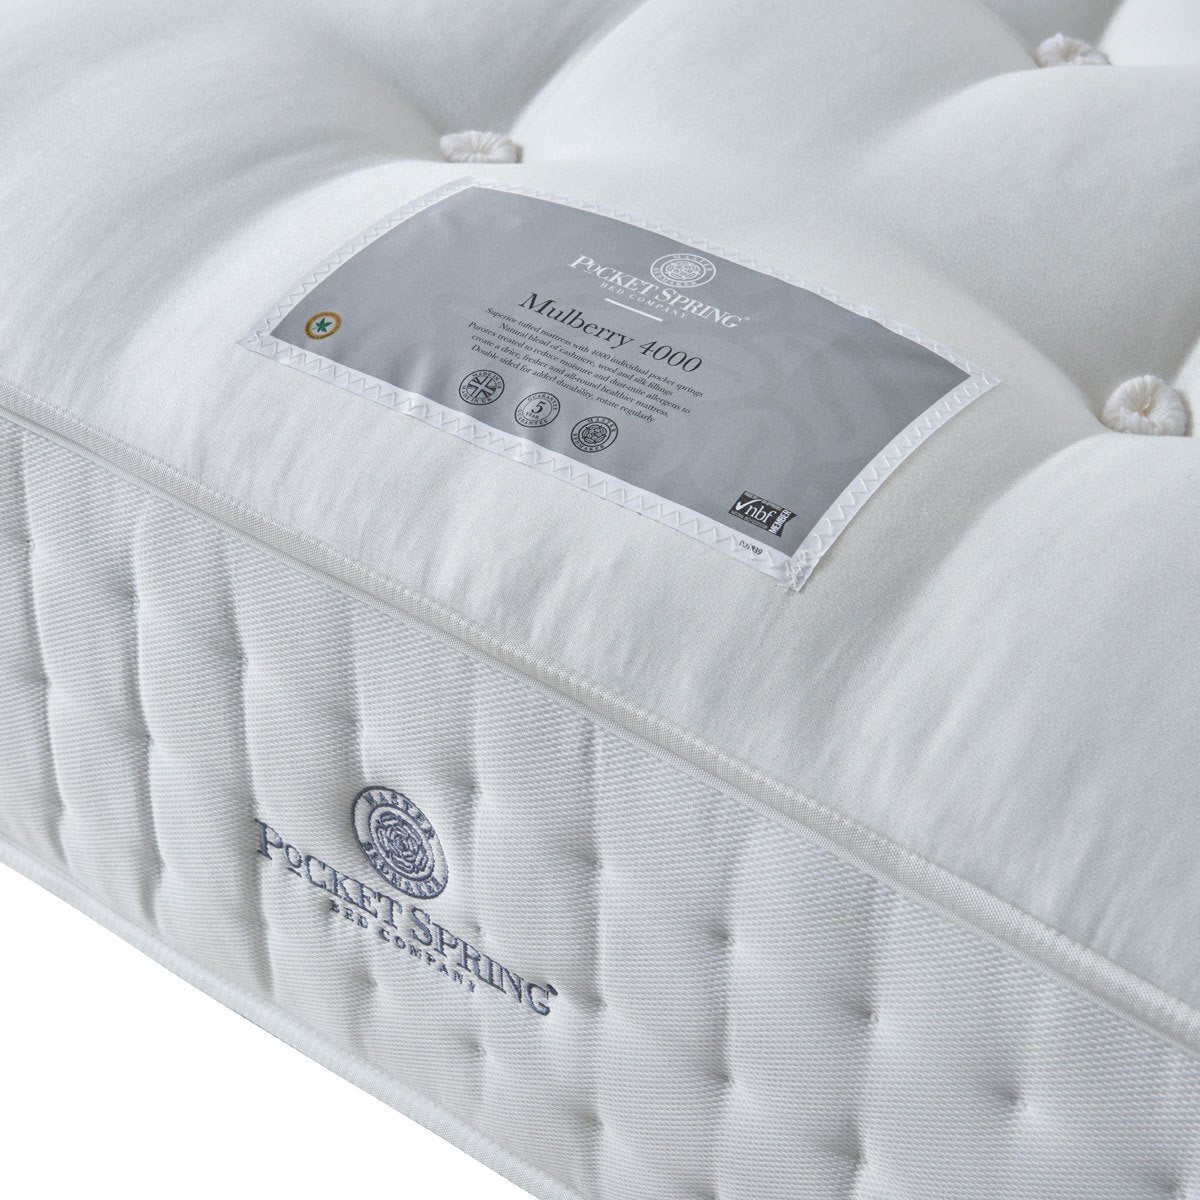 Pocket Spring Bed Company Mulberry Mattress & Fudge Ottoman Divan in 3 Sizes - Signature Retail Stores